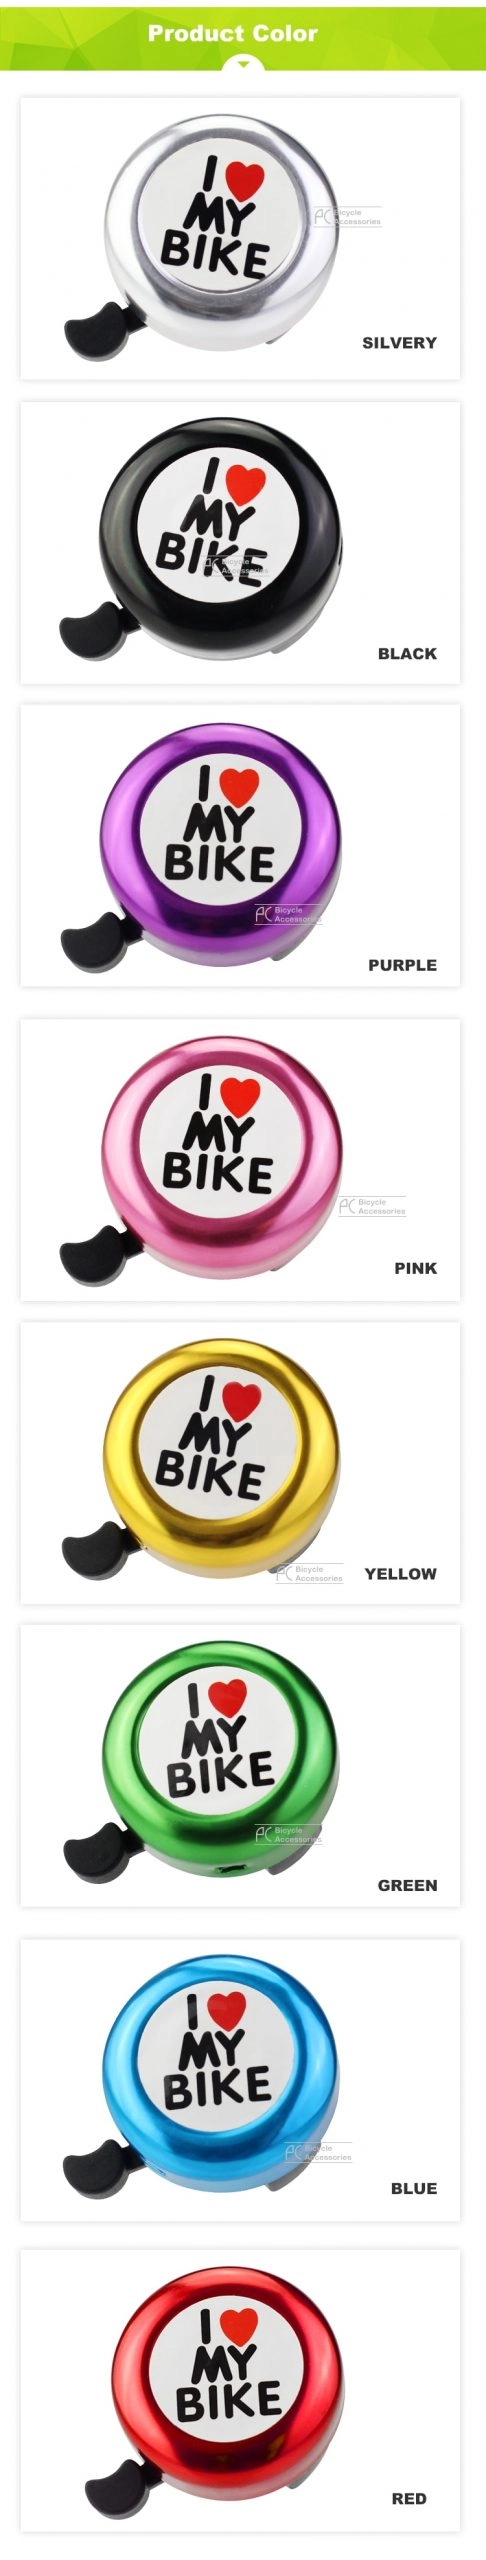 PCycling Bicycle Bell I Love My Bike Printed Clear Sound Aluminum Alloy MTB Road Bike Alarm Warning Mini Ring Bell for Children